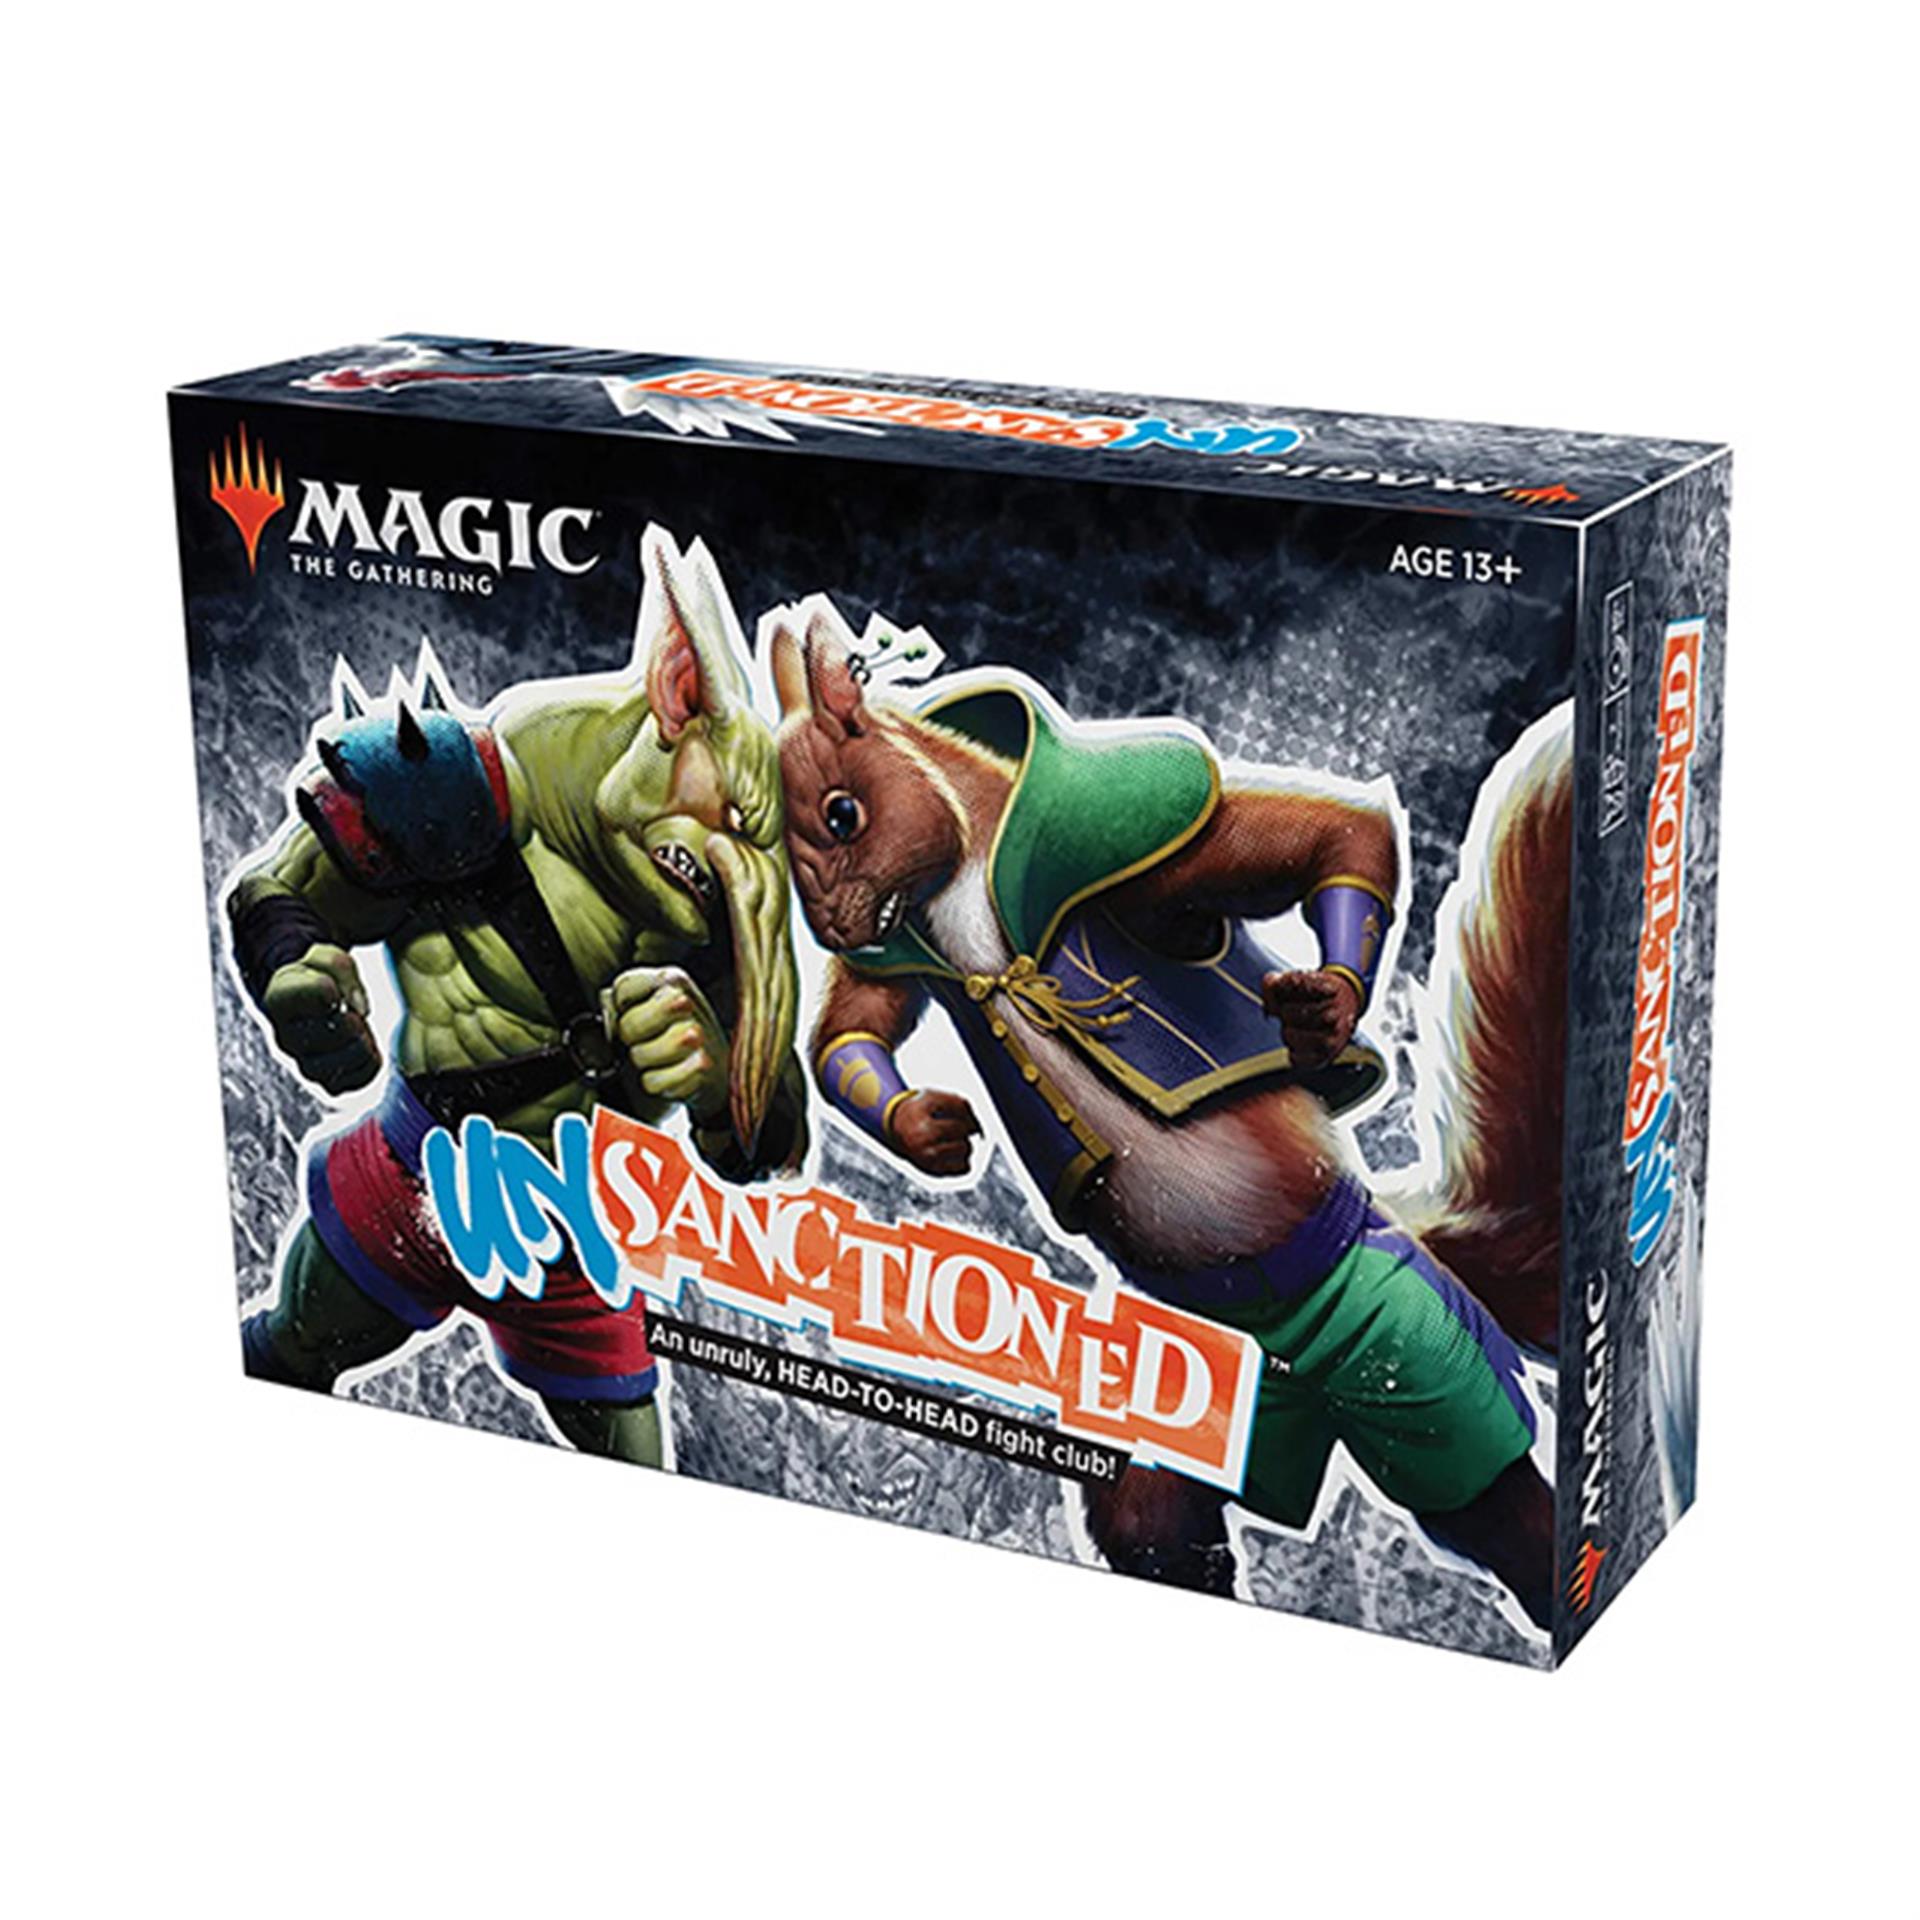 Magic: The Gathering – Unsanctioned Box